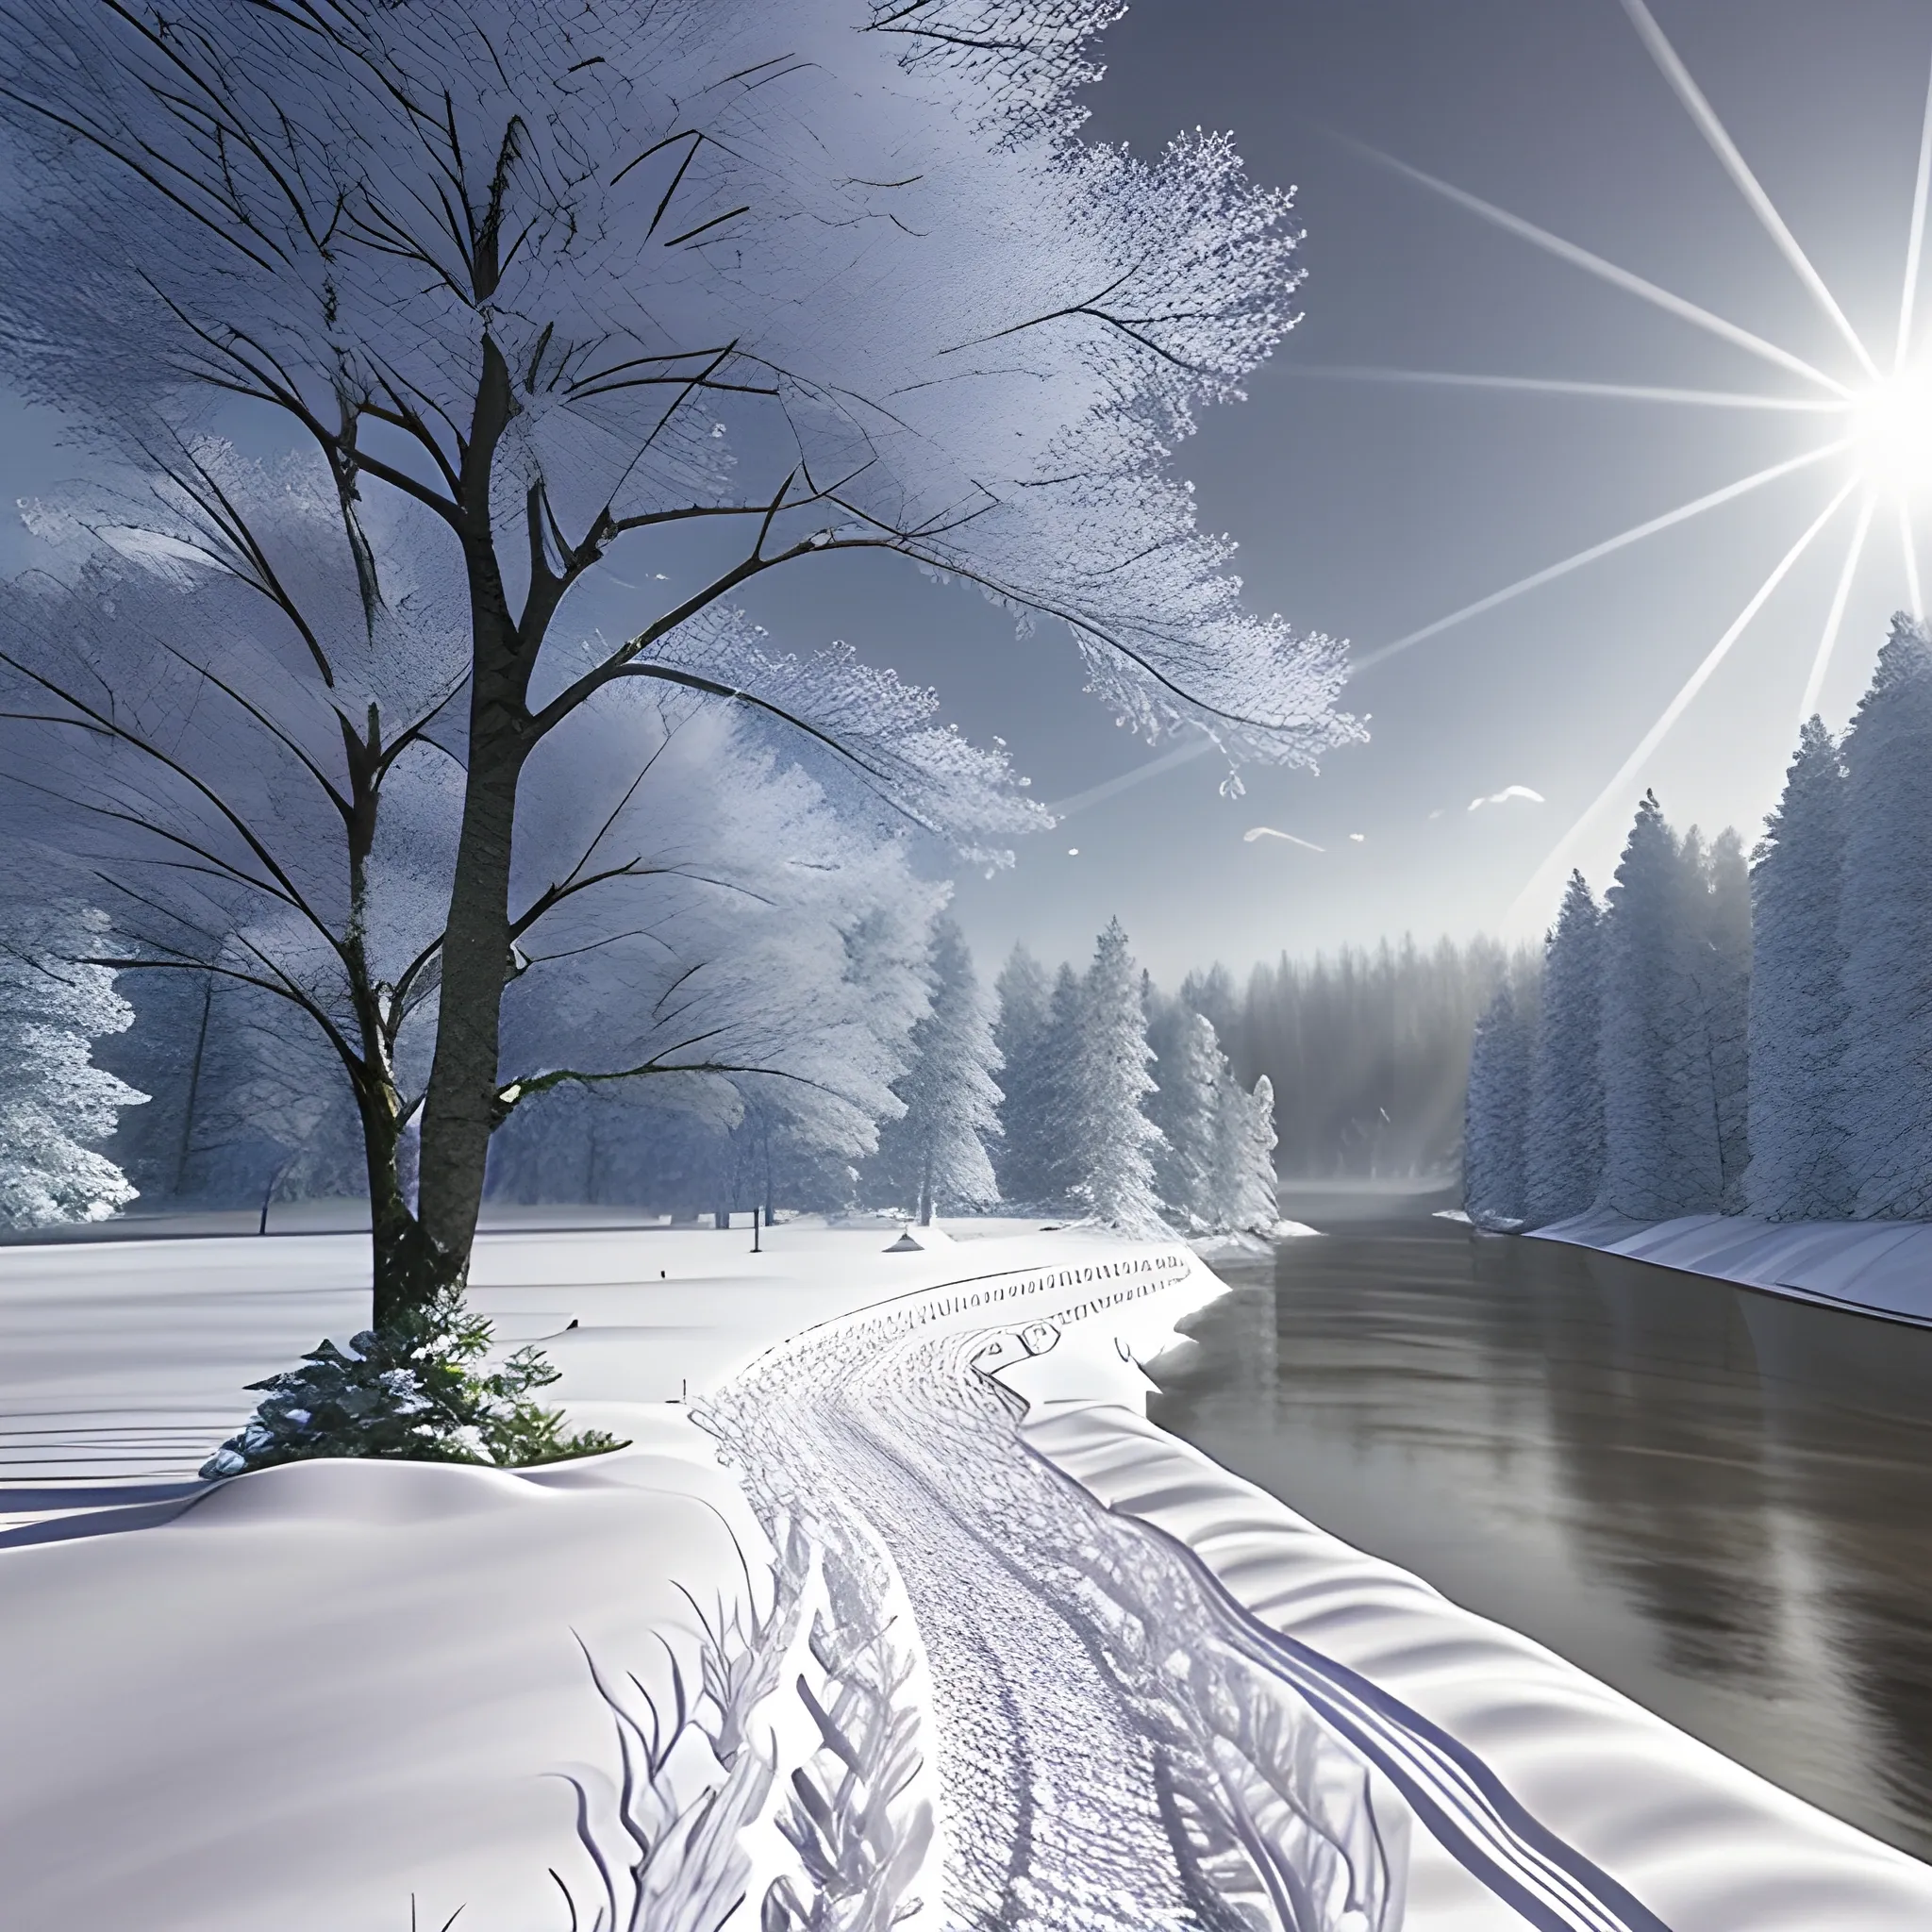 winter scenery, windy falling snow, snowy field with dark trees and a little river or lake in the middle, some white winter flowers, dark forest theme, sunrays between the trees, 3D